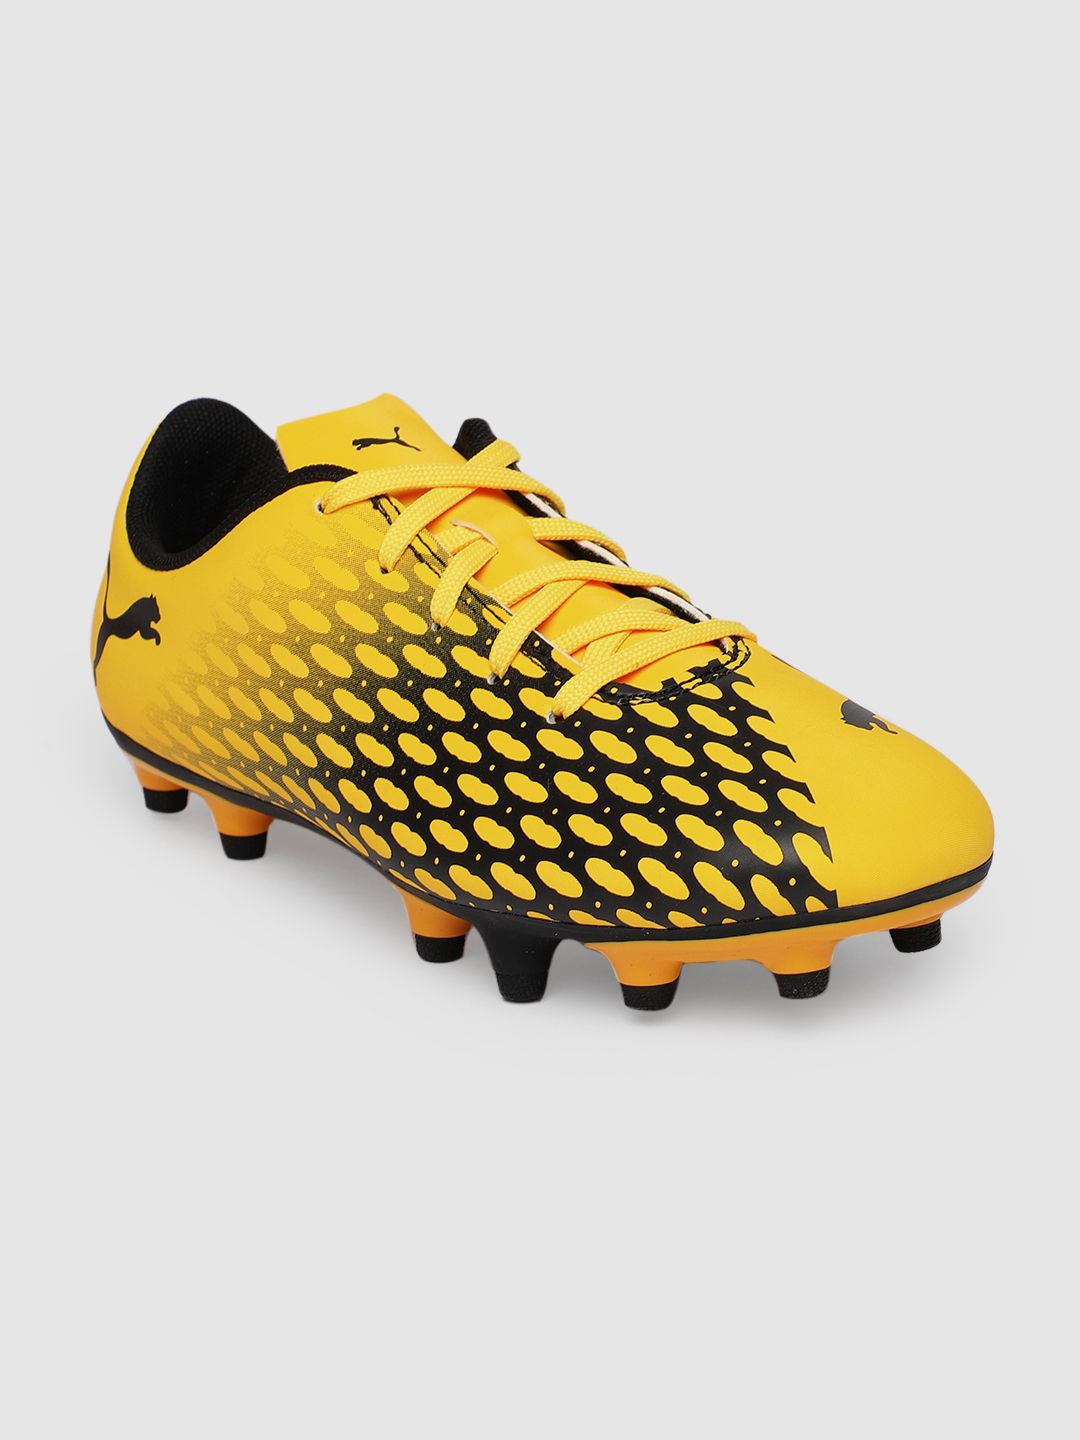 Puma Unisex Yellow Spirit III FG Youth Football Shoes Price in India